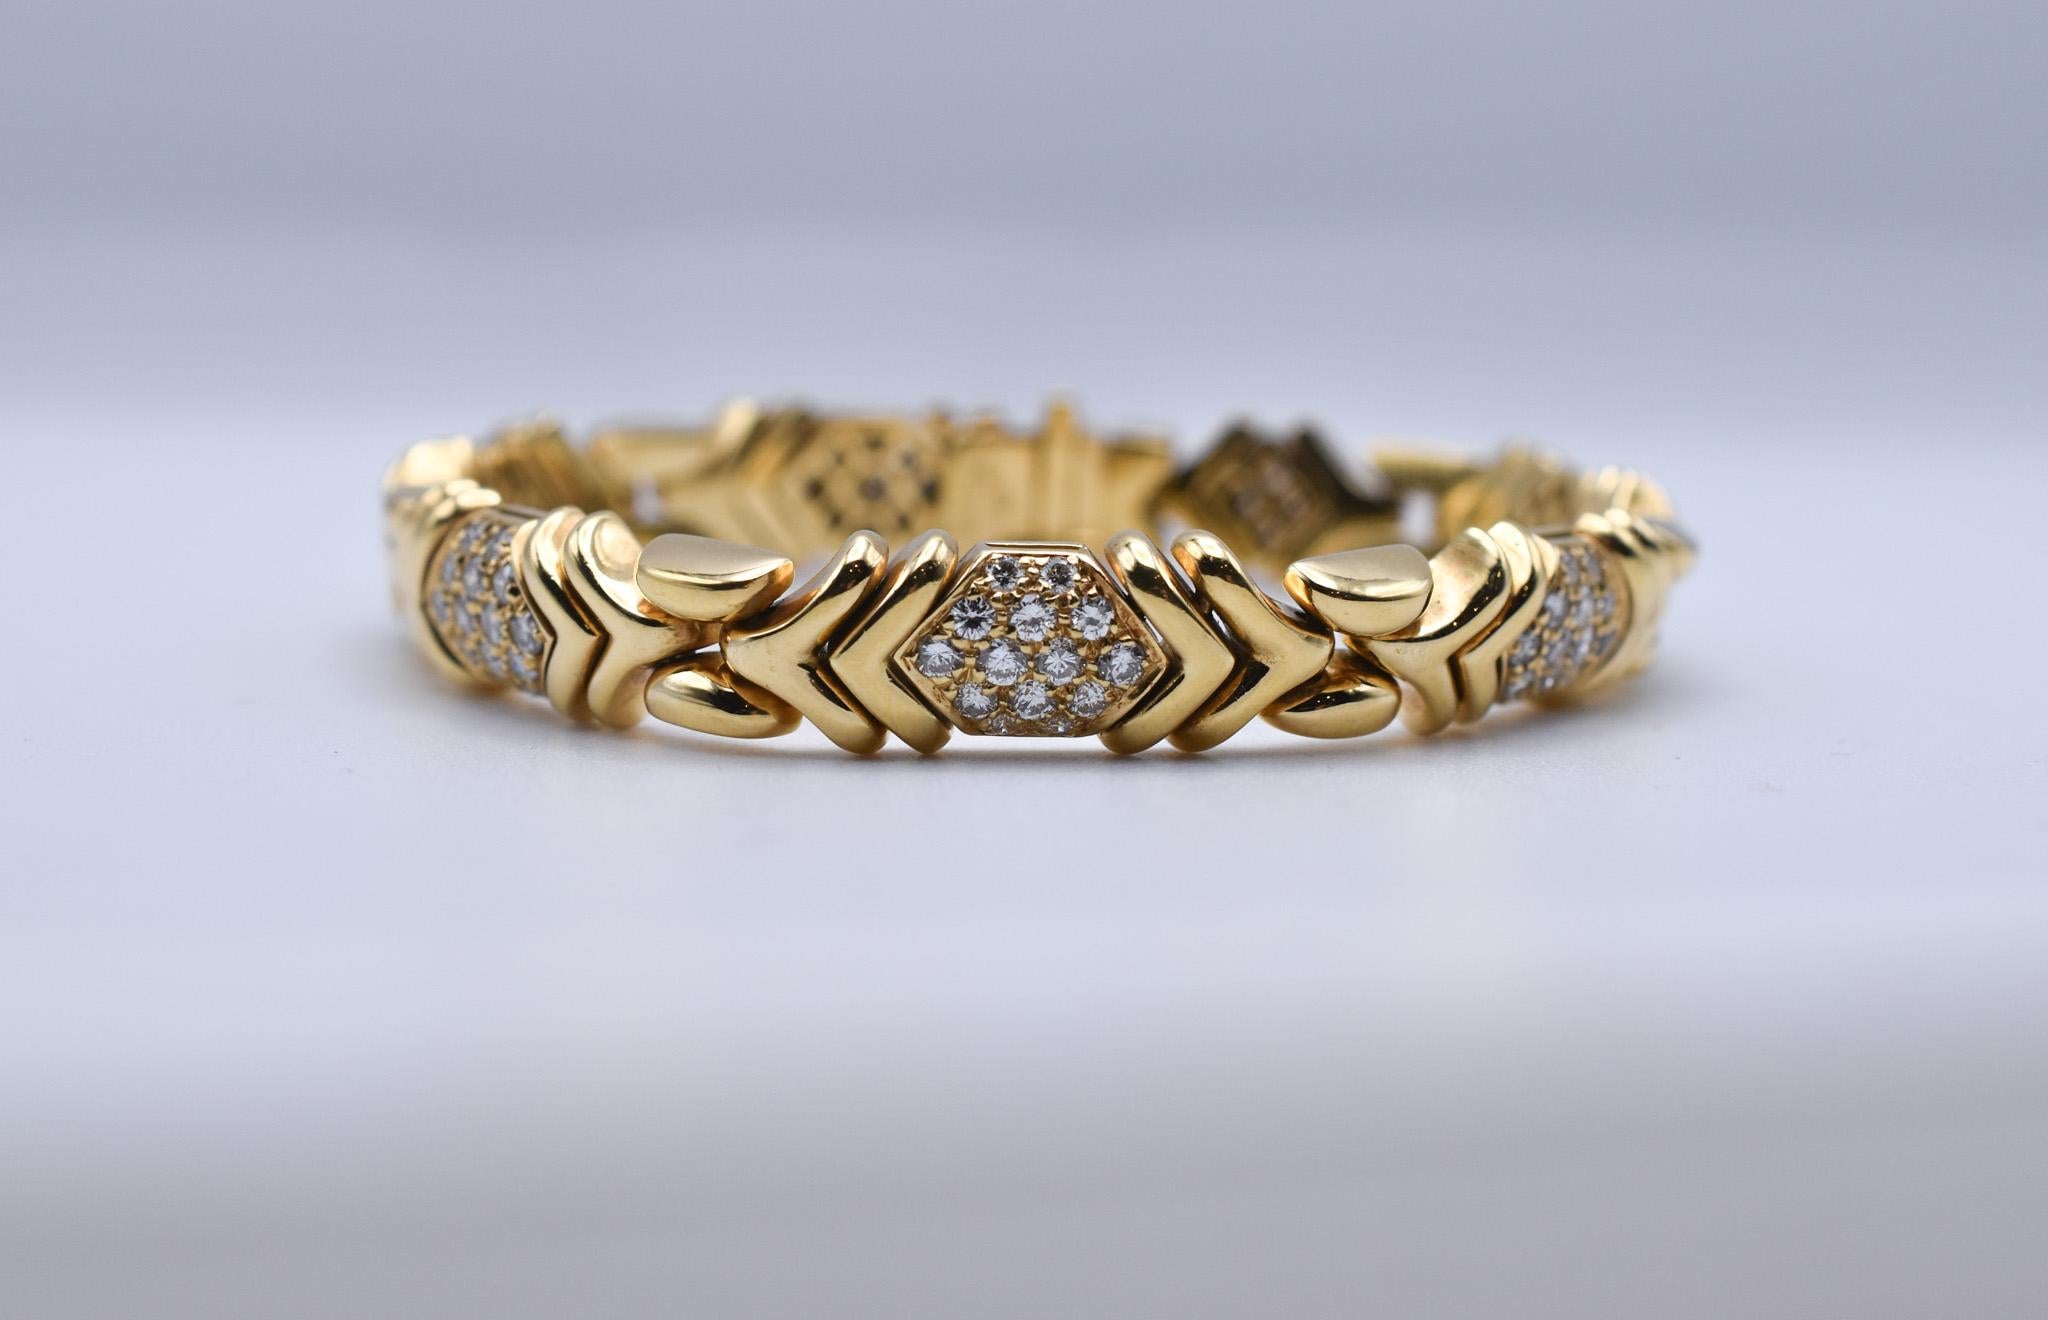 Bulgari Parentesi Diamond and Gold Bracelet, with gold panels alternated by pavé-set spacers. Made in Italy, circa 1980


